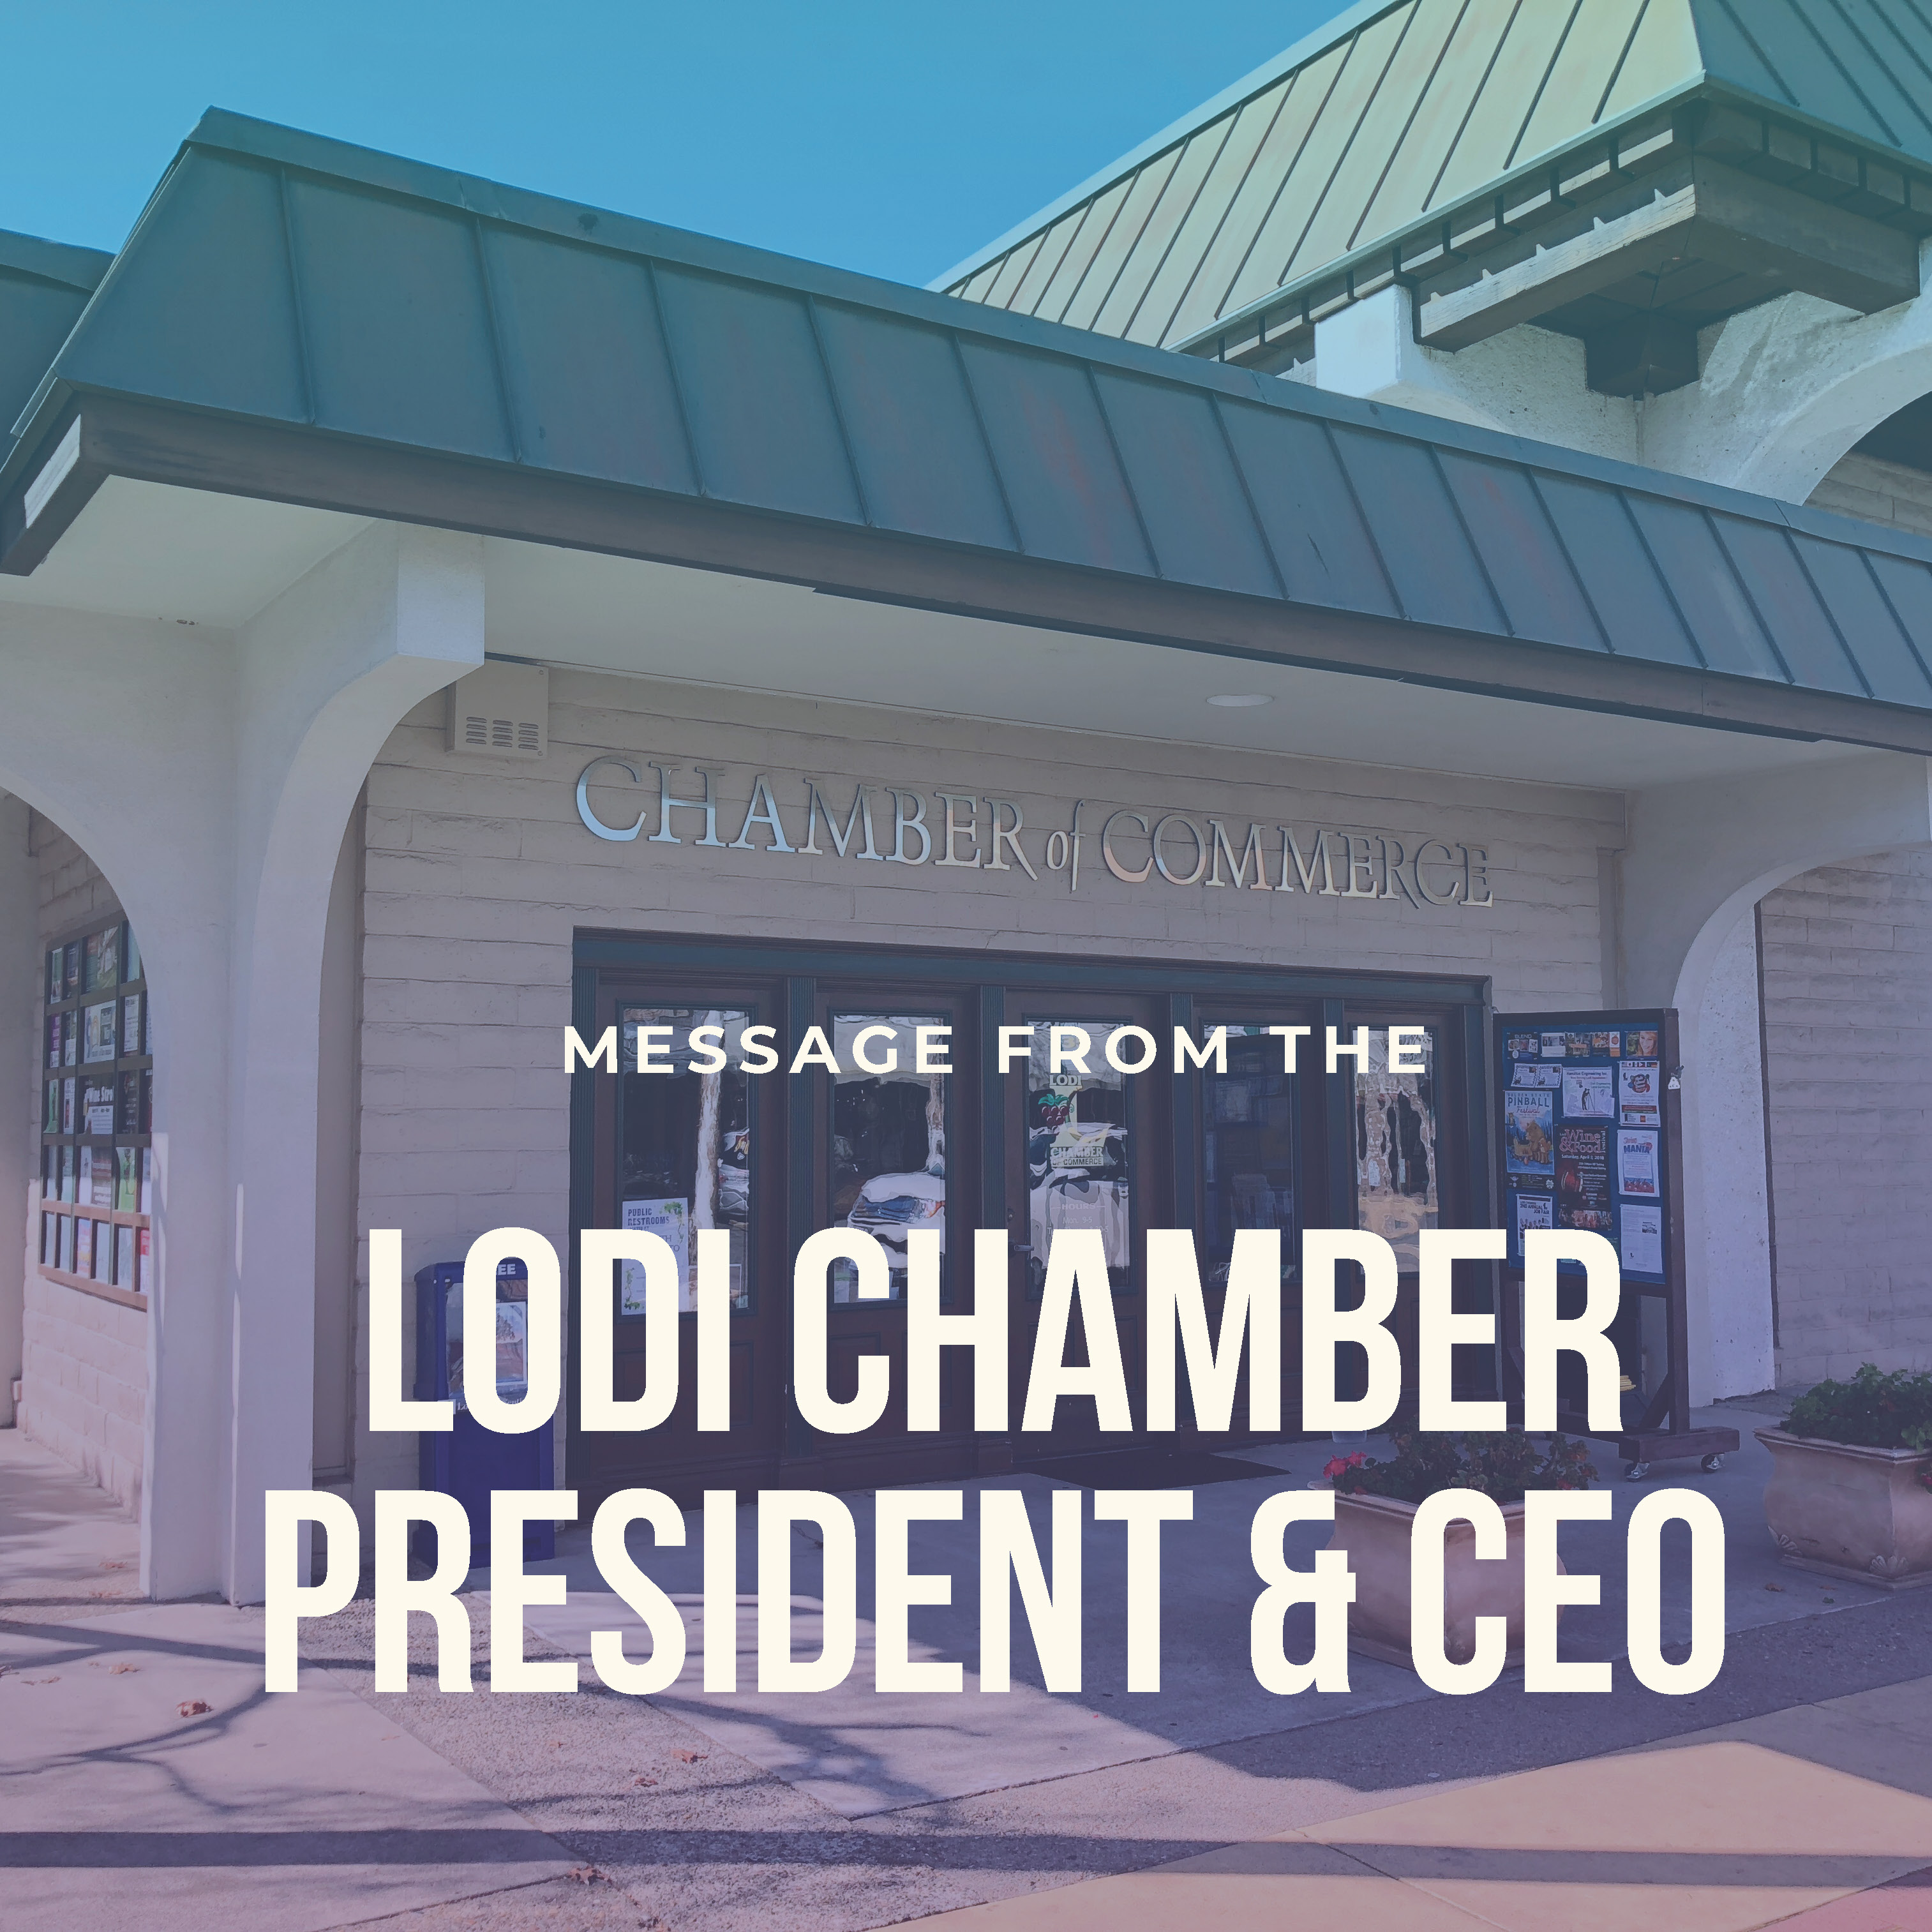 Message from the President & CEO